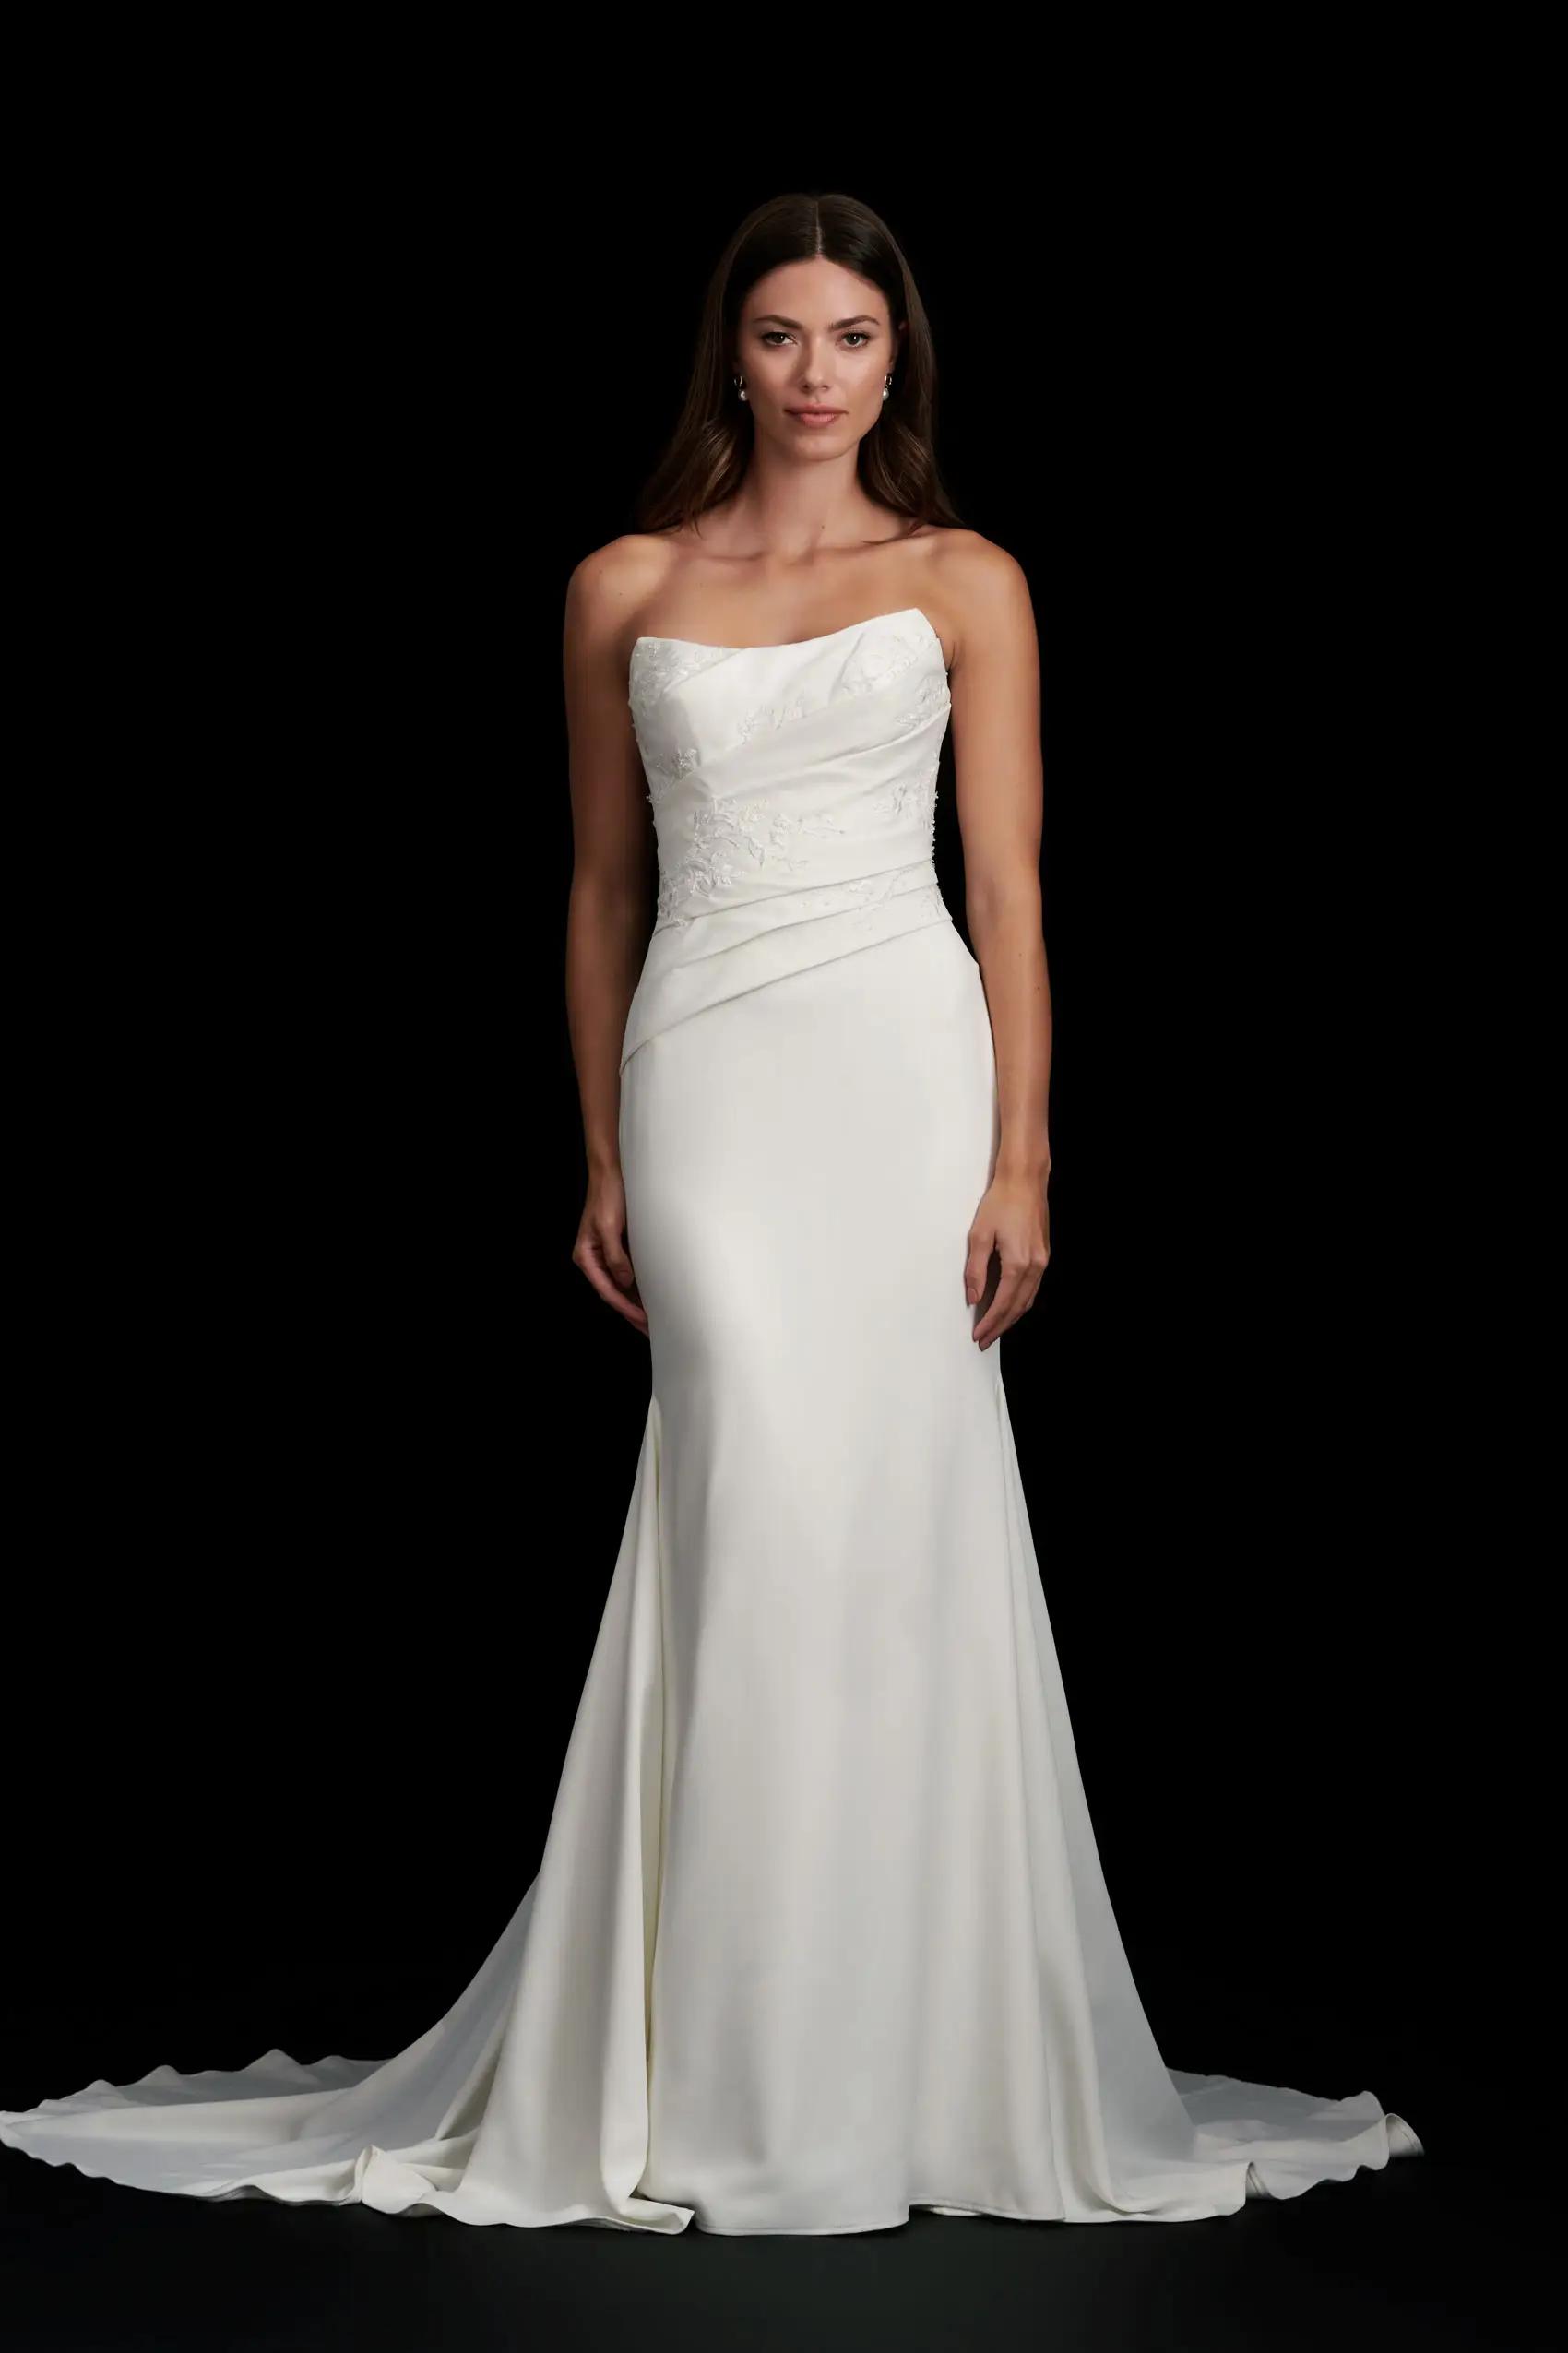 Claude wedding dress style like Lexington in crepe by Kelly Faetanini in Columbus, Ohio with draped and lace detail on bodice